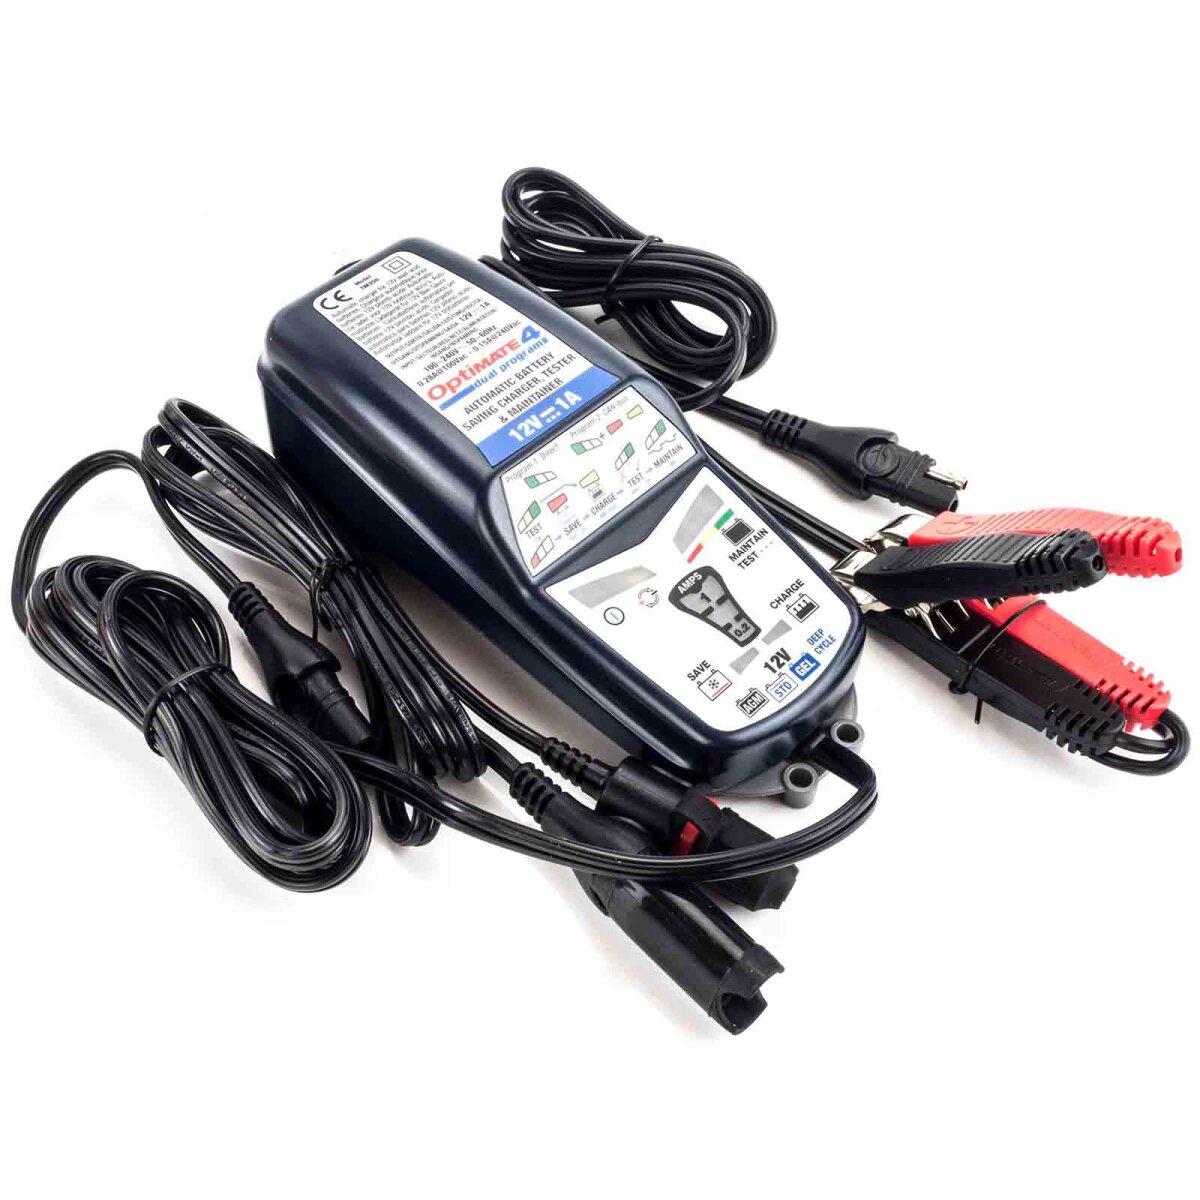 Optimate 12 Volt 6 Amp Fully Automatic Battery Charger